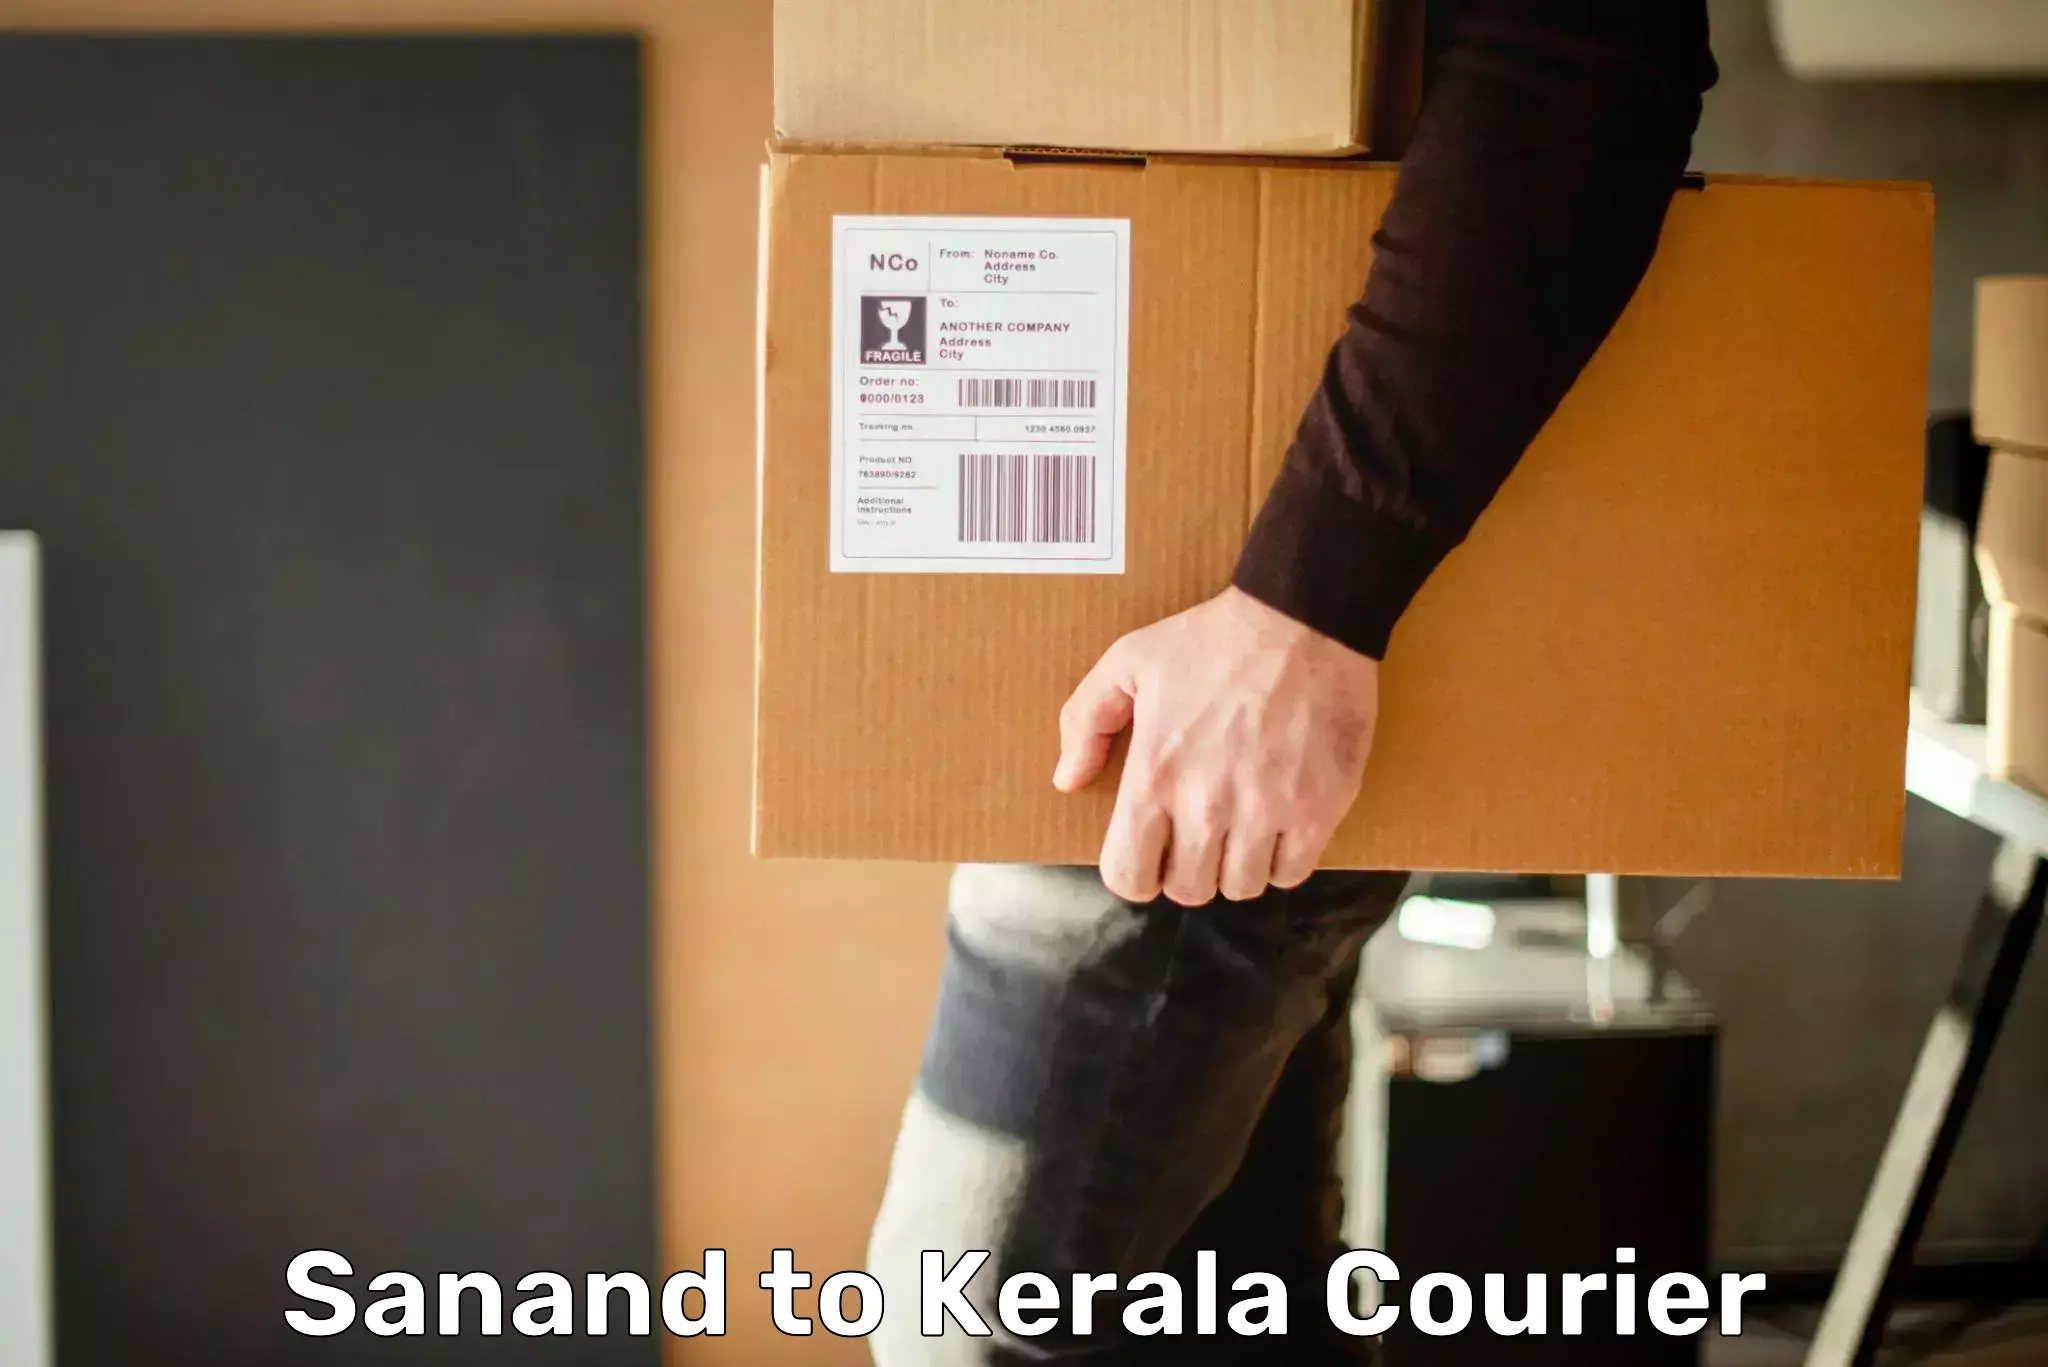 Lightweight parcel options Sanand to Kerala